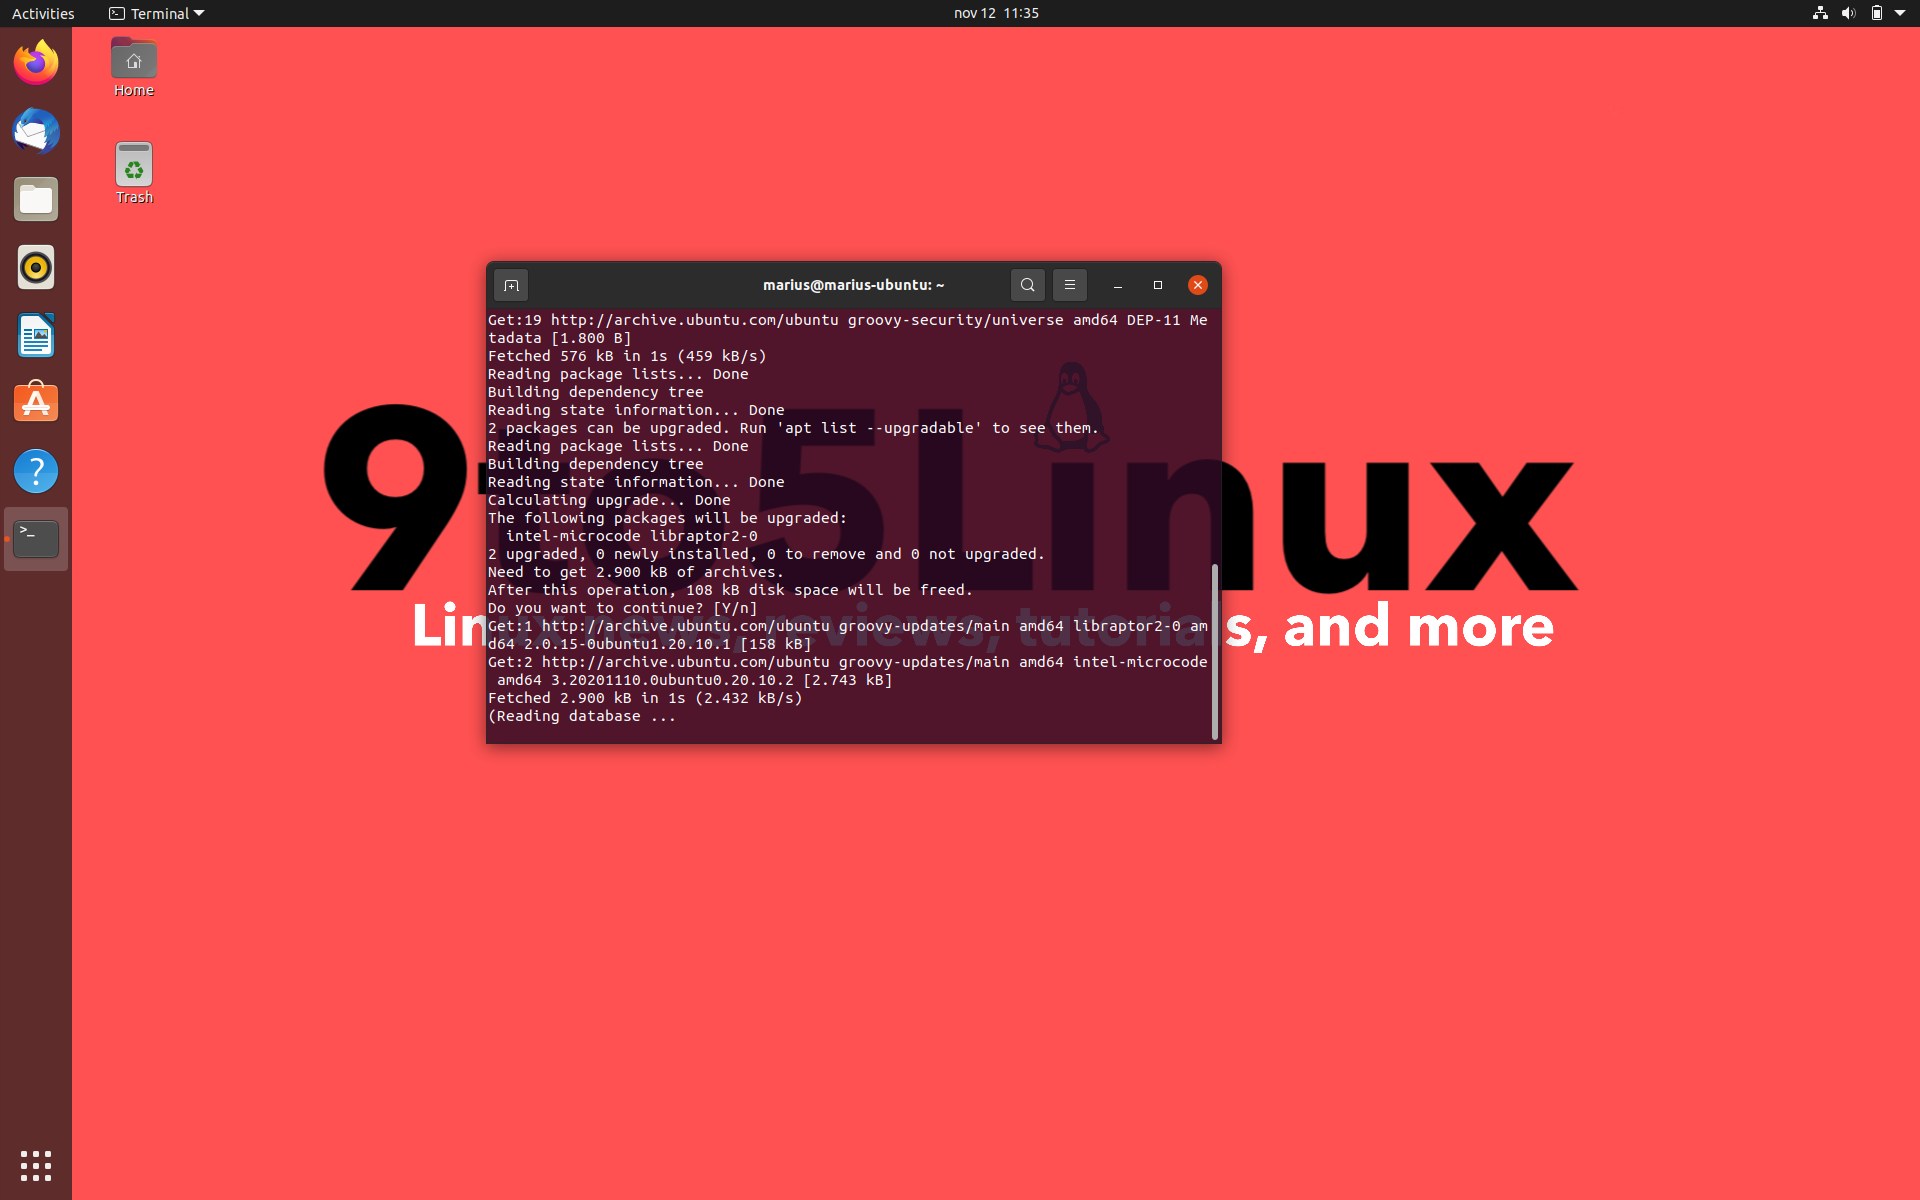 Another Linux Kernel Vulnerability Was Patched in All Supported Ubuntu Releases